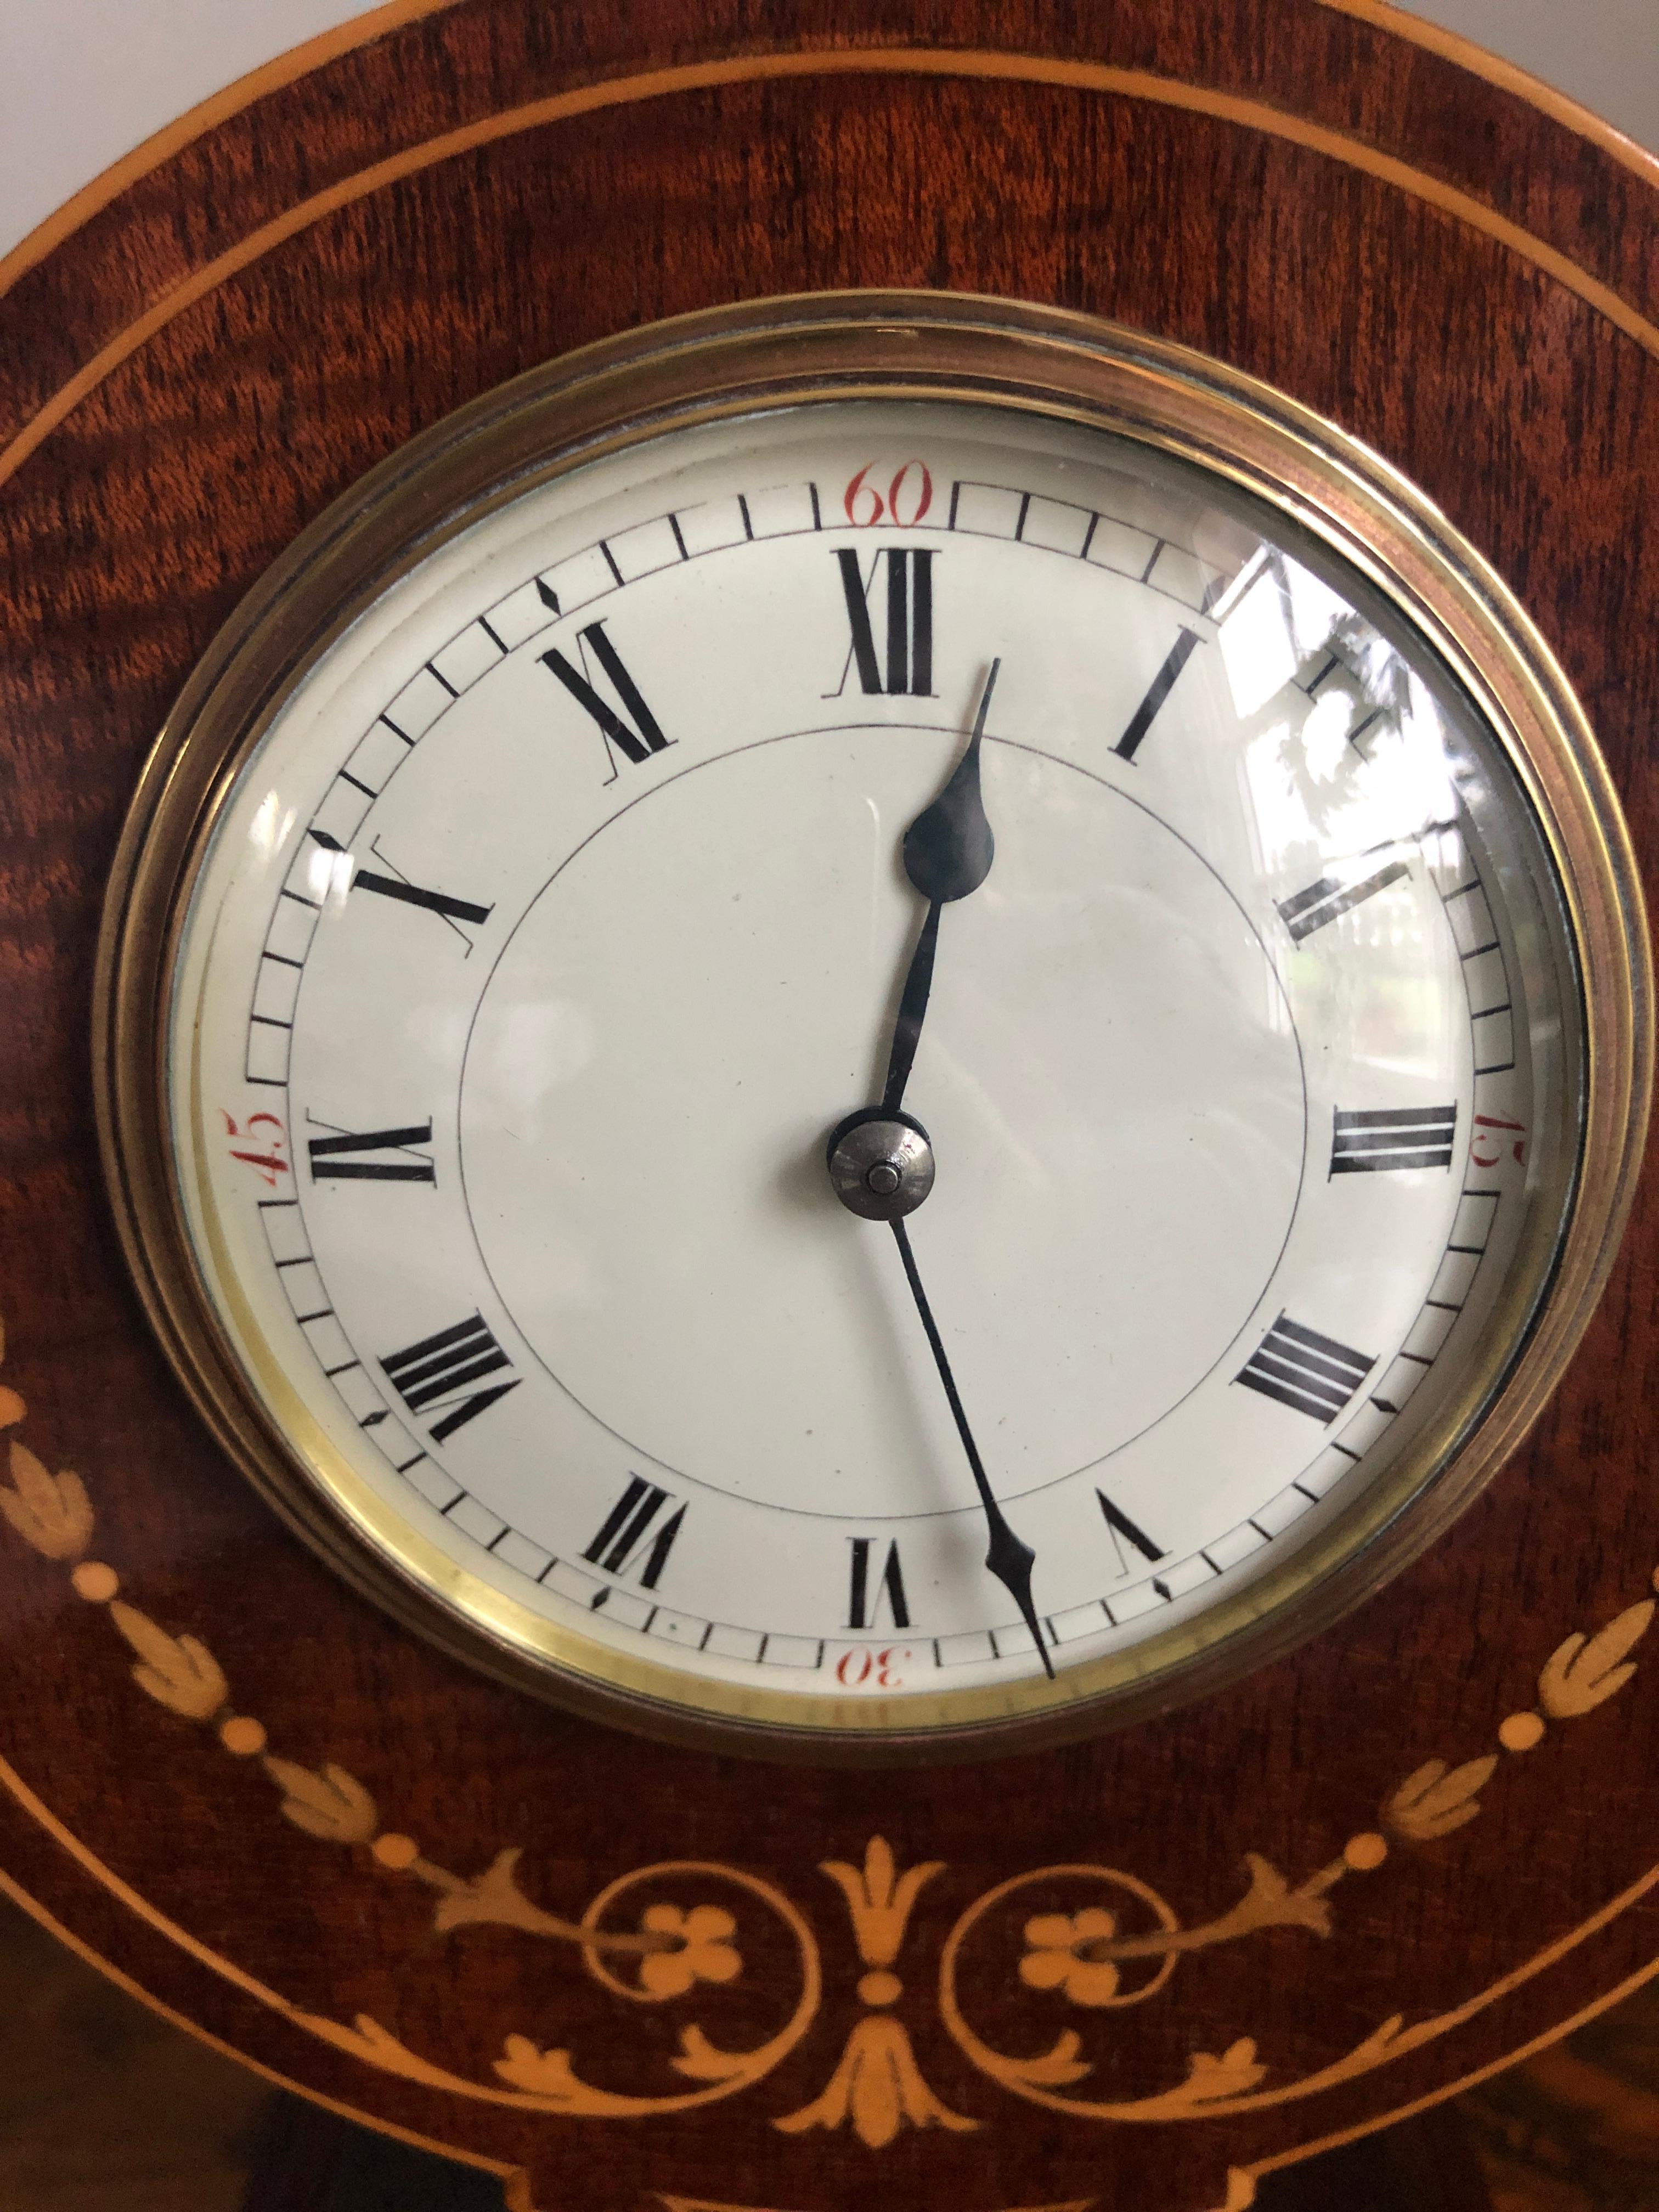 Fine Edwardian inlaid mahogany desk clock having a magnificent inlaid balloon shaped marquetry case with original brass ball feet. An elegant enameled dial with original hands with an 8 day movement. It is in good working order and comes with its